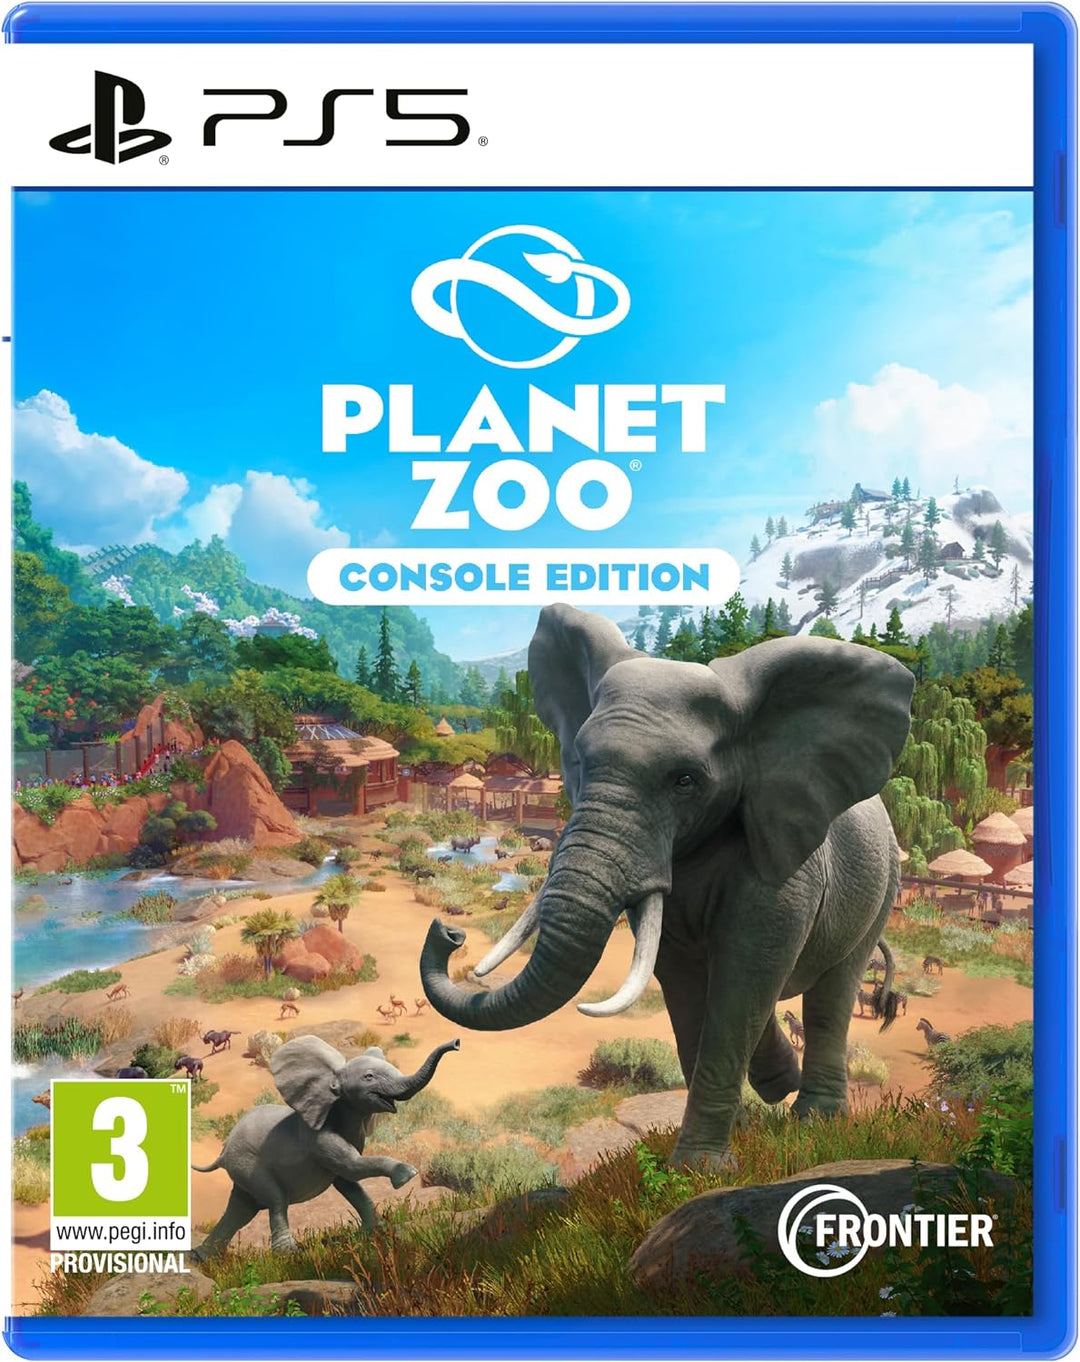 Planet Zoo (PS5) Console Edition